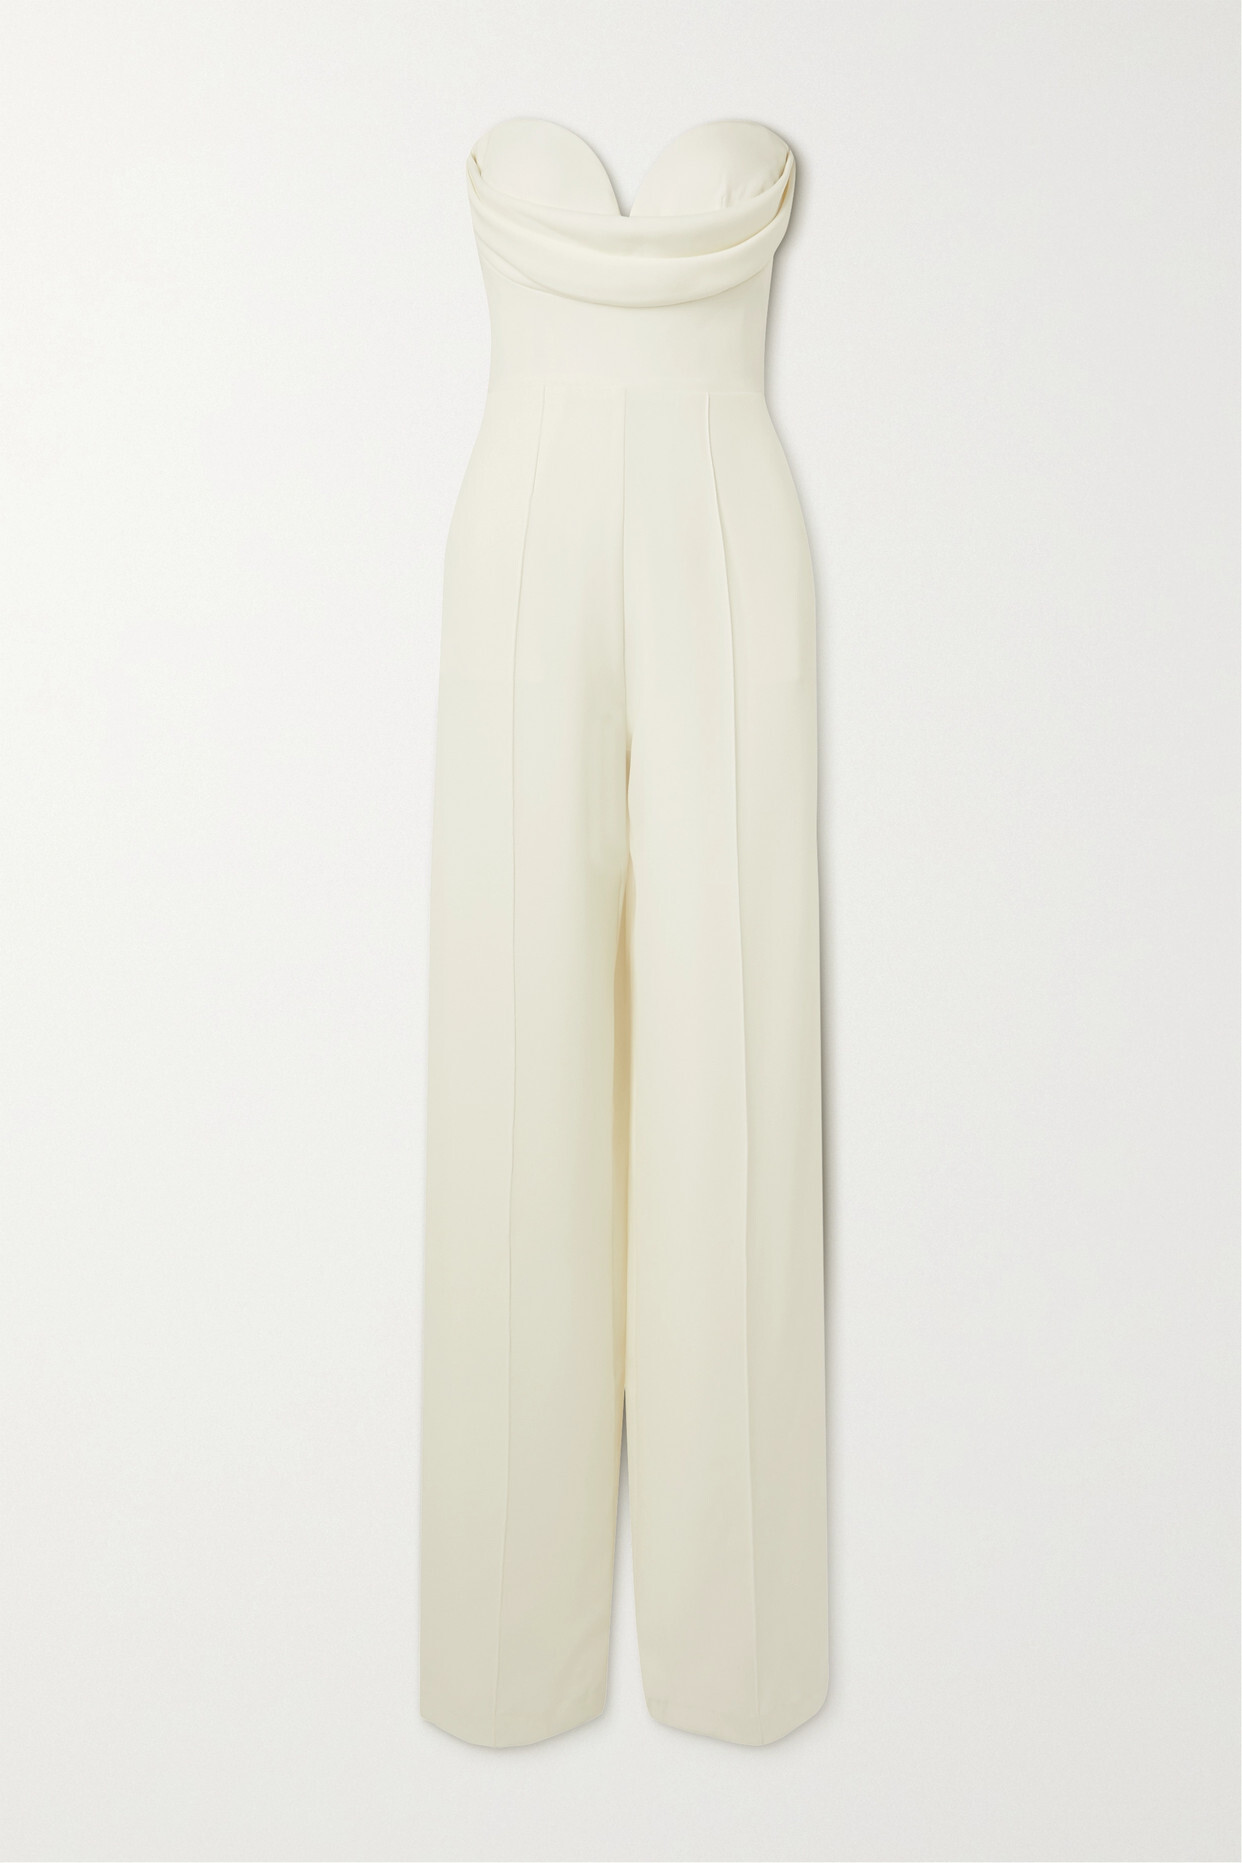 Alex Perry - Hayden Strapless Draped Crepe Jumpsuit - White